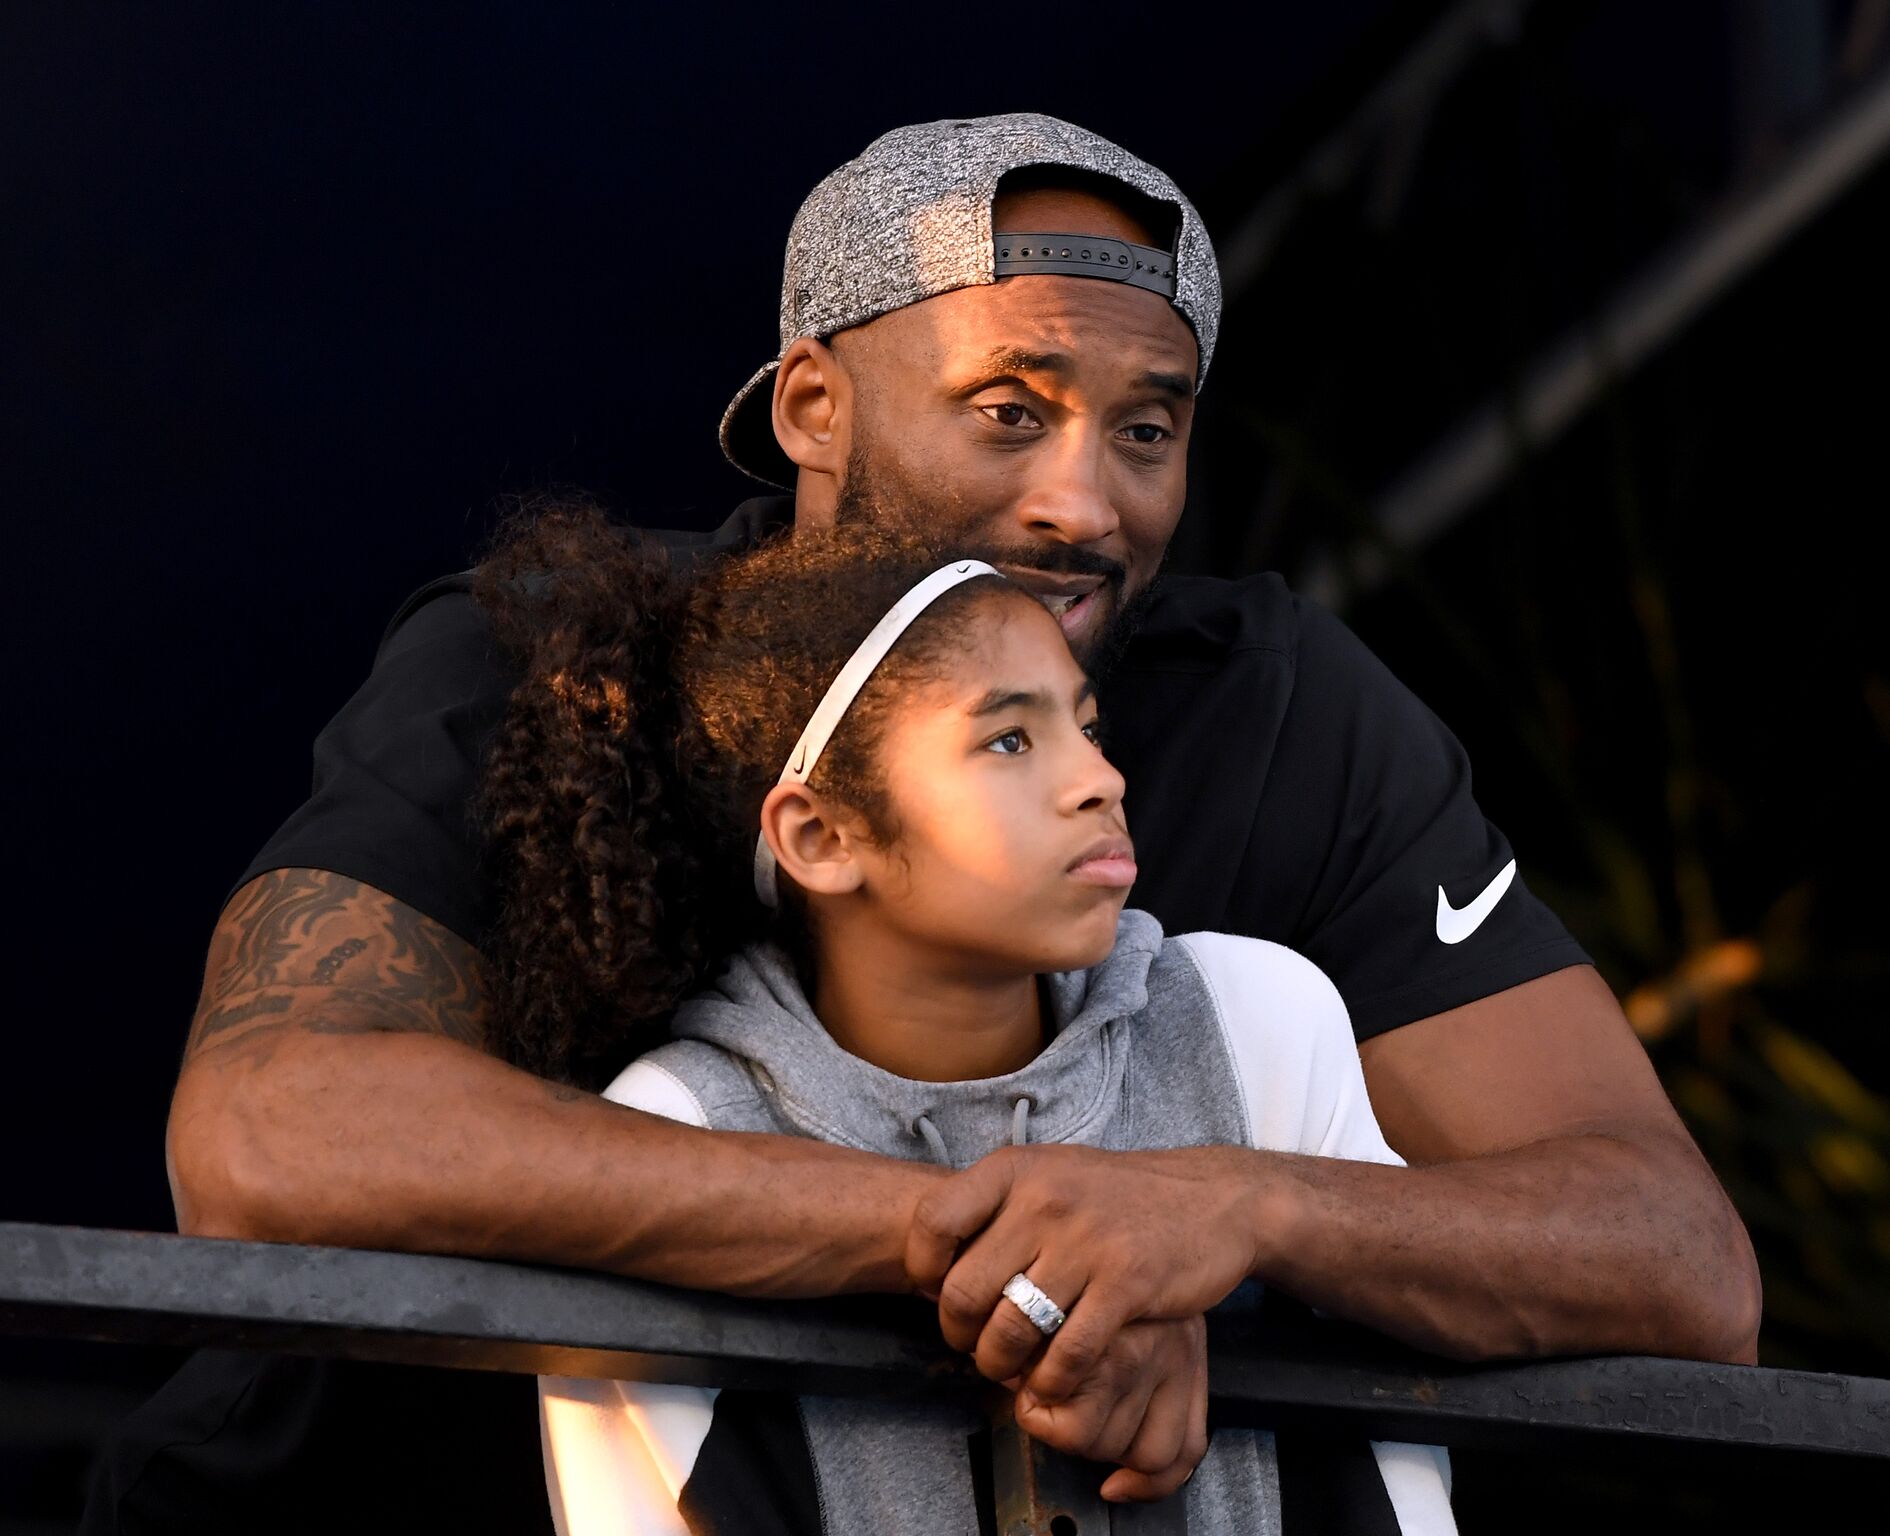 Kobe Bryant and daughter Gianna Bryant watch during day 2 of the Phillips 66 National Swimming Championships at the Woollett Aquatics Center on July 26, 2018 | Photo: Getty Images